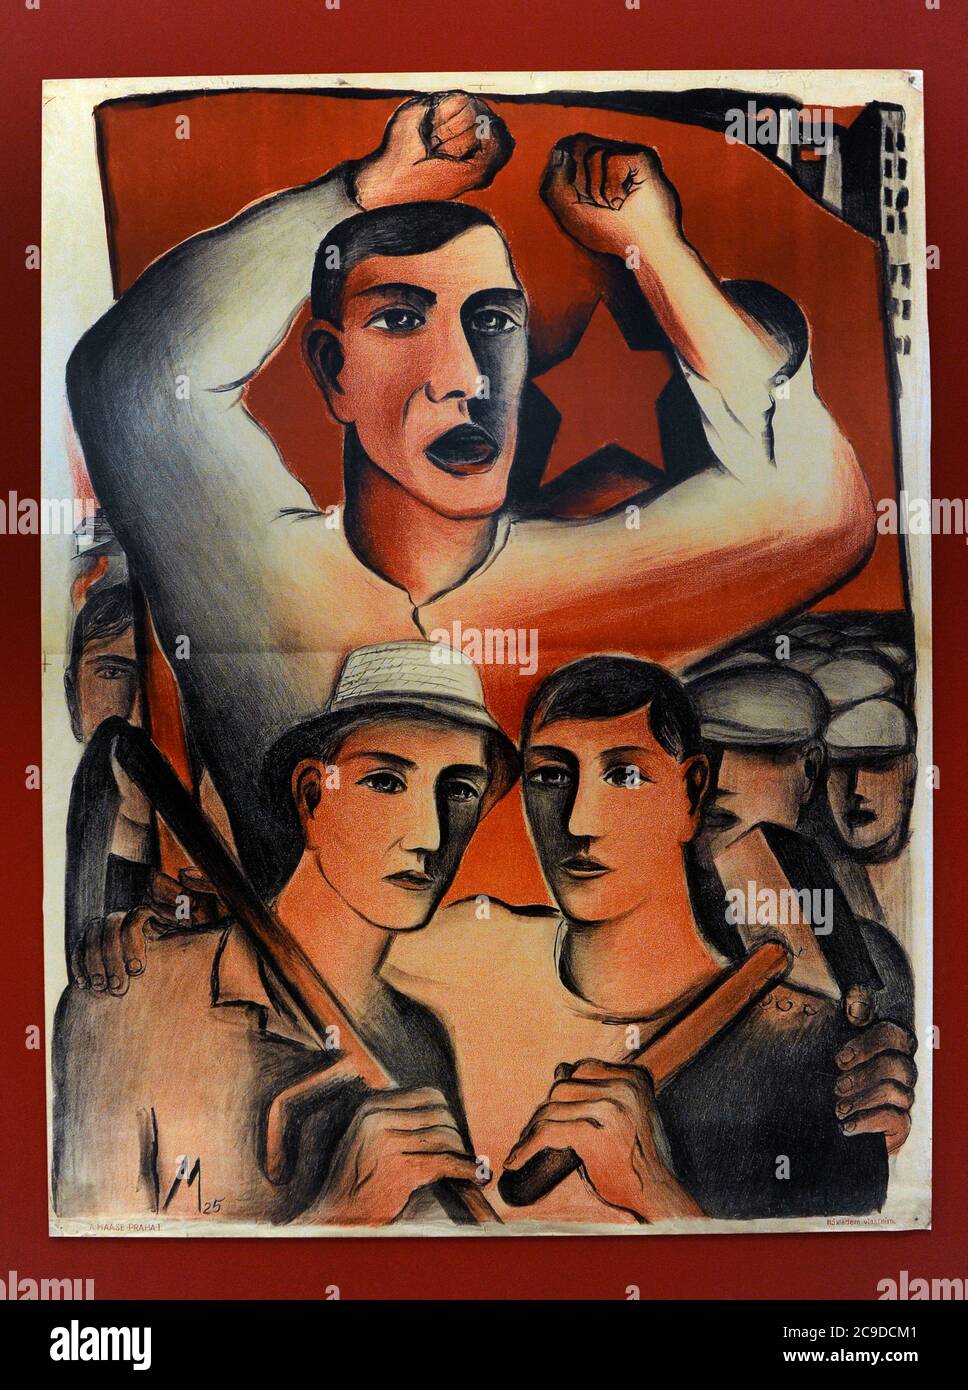 Election poster of the Communist Party of Czechoslovakia (KSC), 1925. Facsimilie, lithograph. Printed by A. Haase, Prague. National Gallery. Prague. Czech Republic. Stock Photo